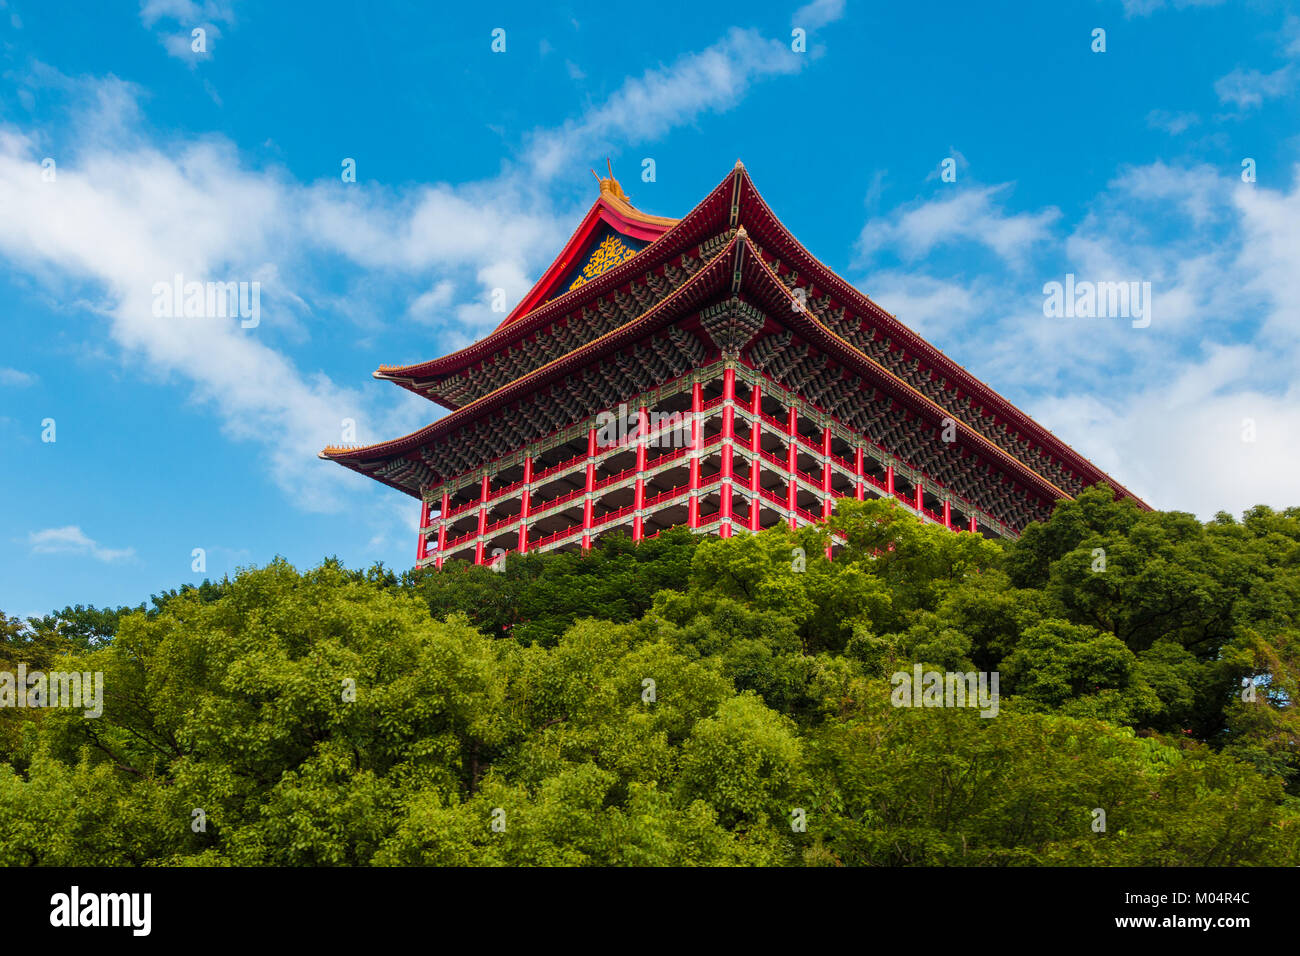 The iconic Grand Hotel or Yuanshan Great Hotel located at Yuan Hill in Taipei, Taiwan. Main focus in this photo is the Chinese architectural roof. Stock Photo